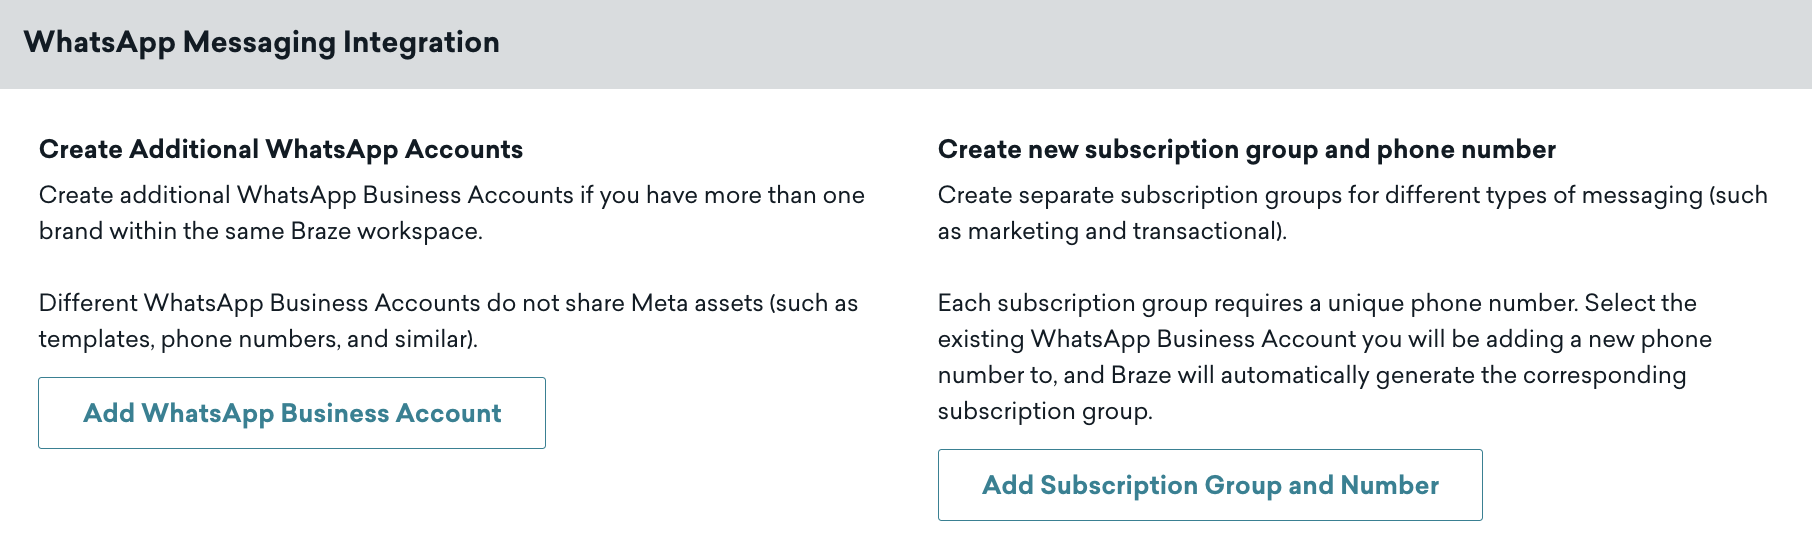 WhatsApp Messaging Integration section with options to add a business account or add a subscription group and number.